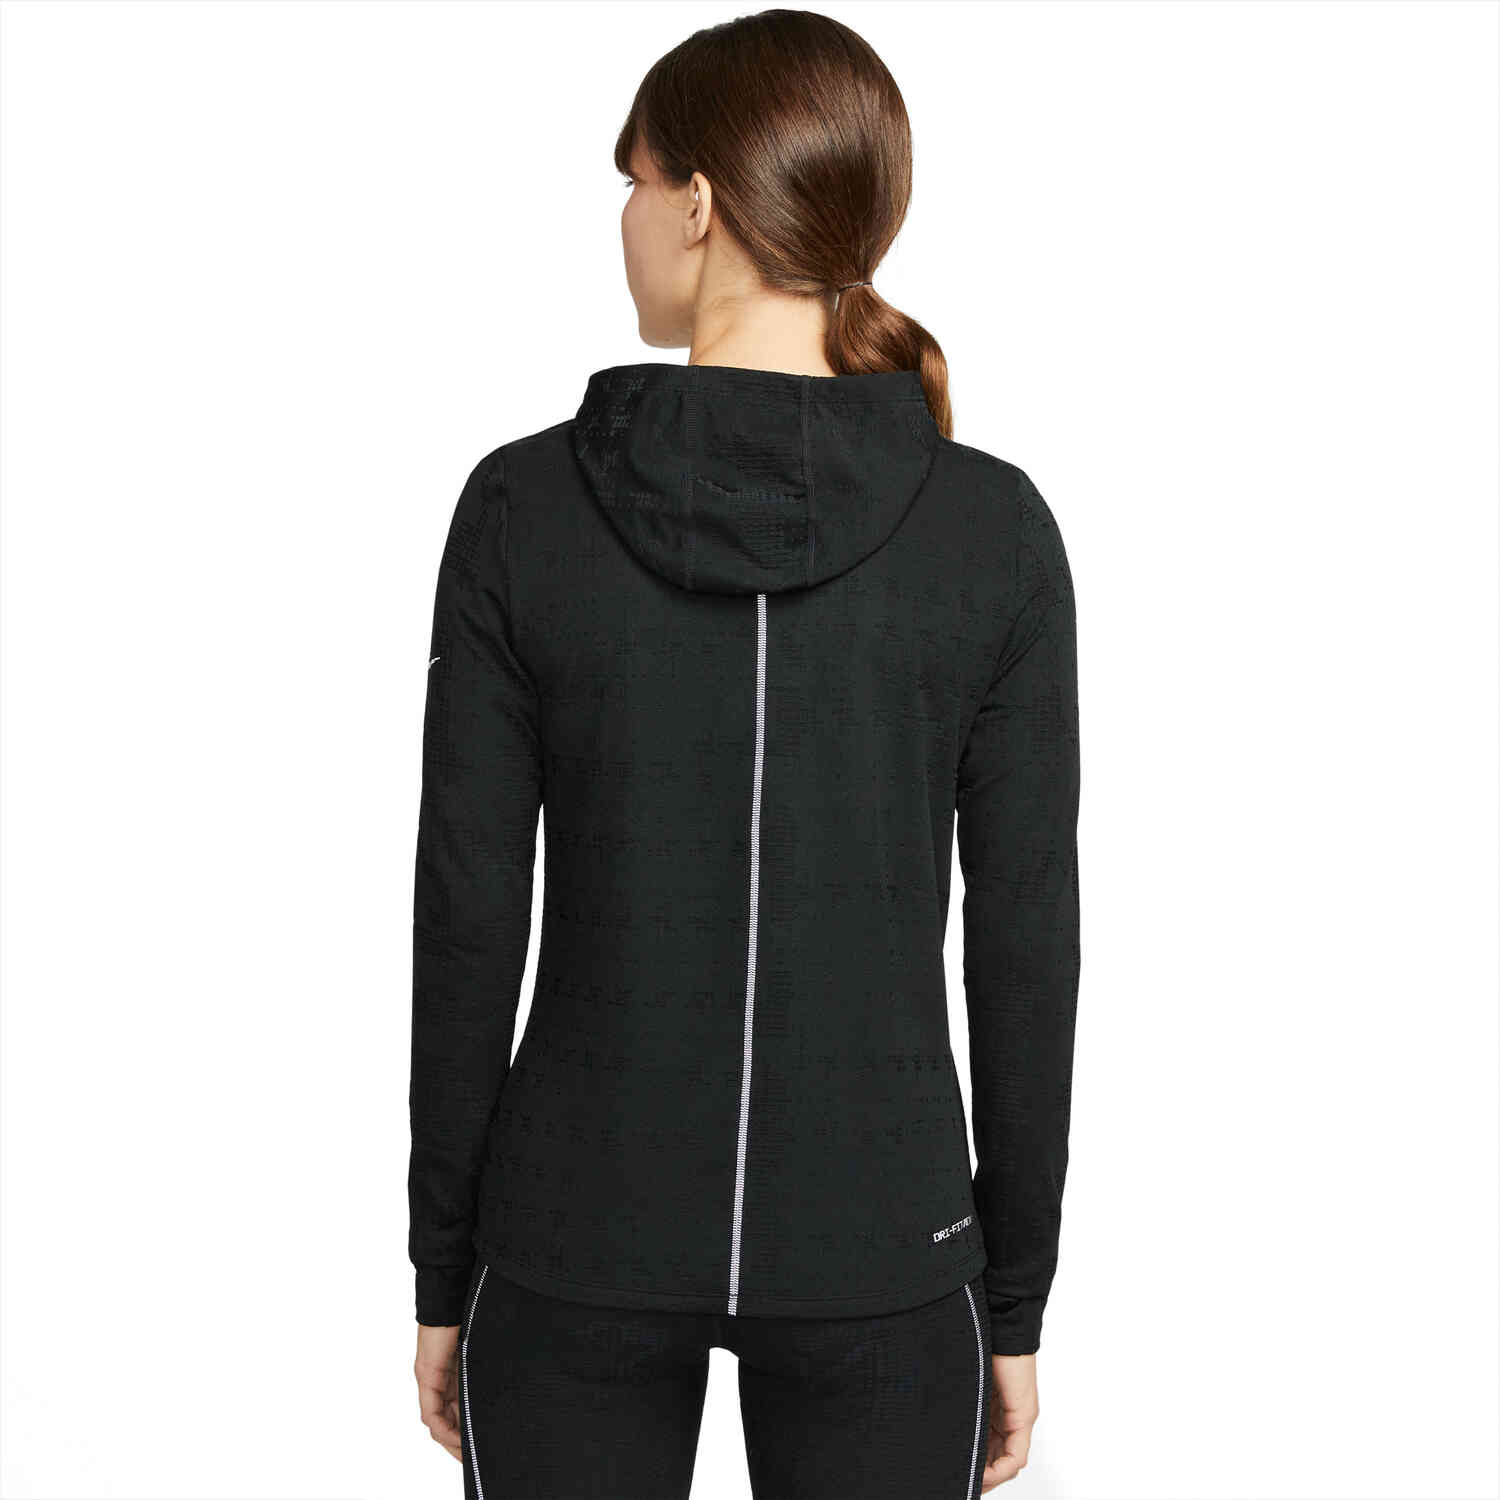 clothing growth ignorance Womens Nike Therma-Fit ADV Running Hoodie - Black/Reflective Silv -  SoccerPro